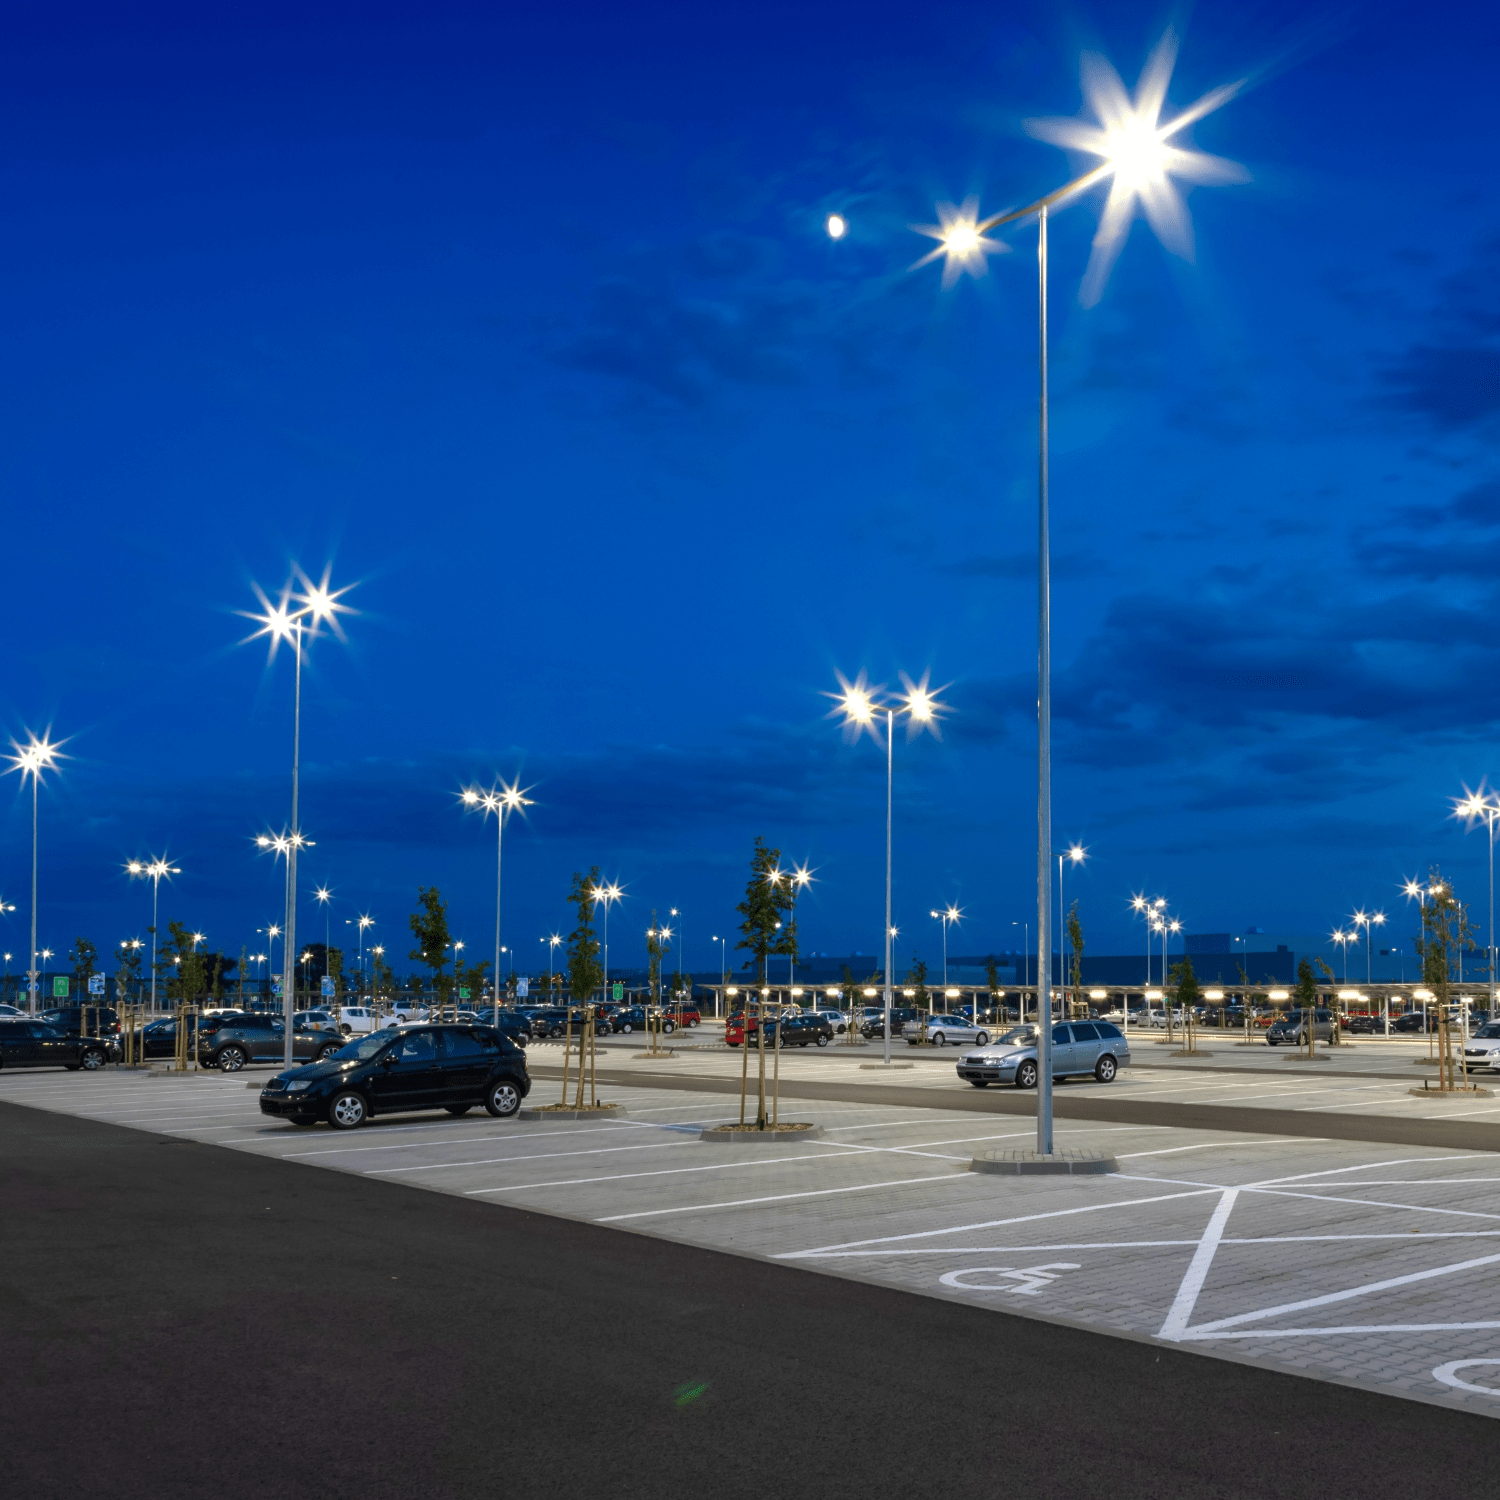 Why should I use LEDs for my commercial parking lot lights?